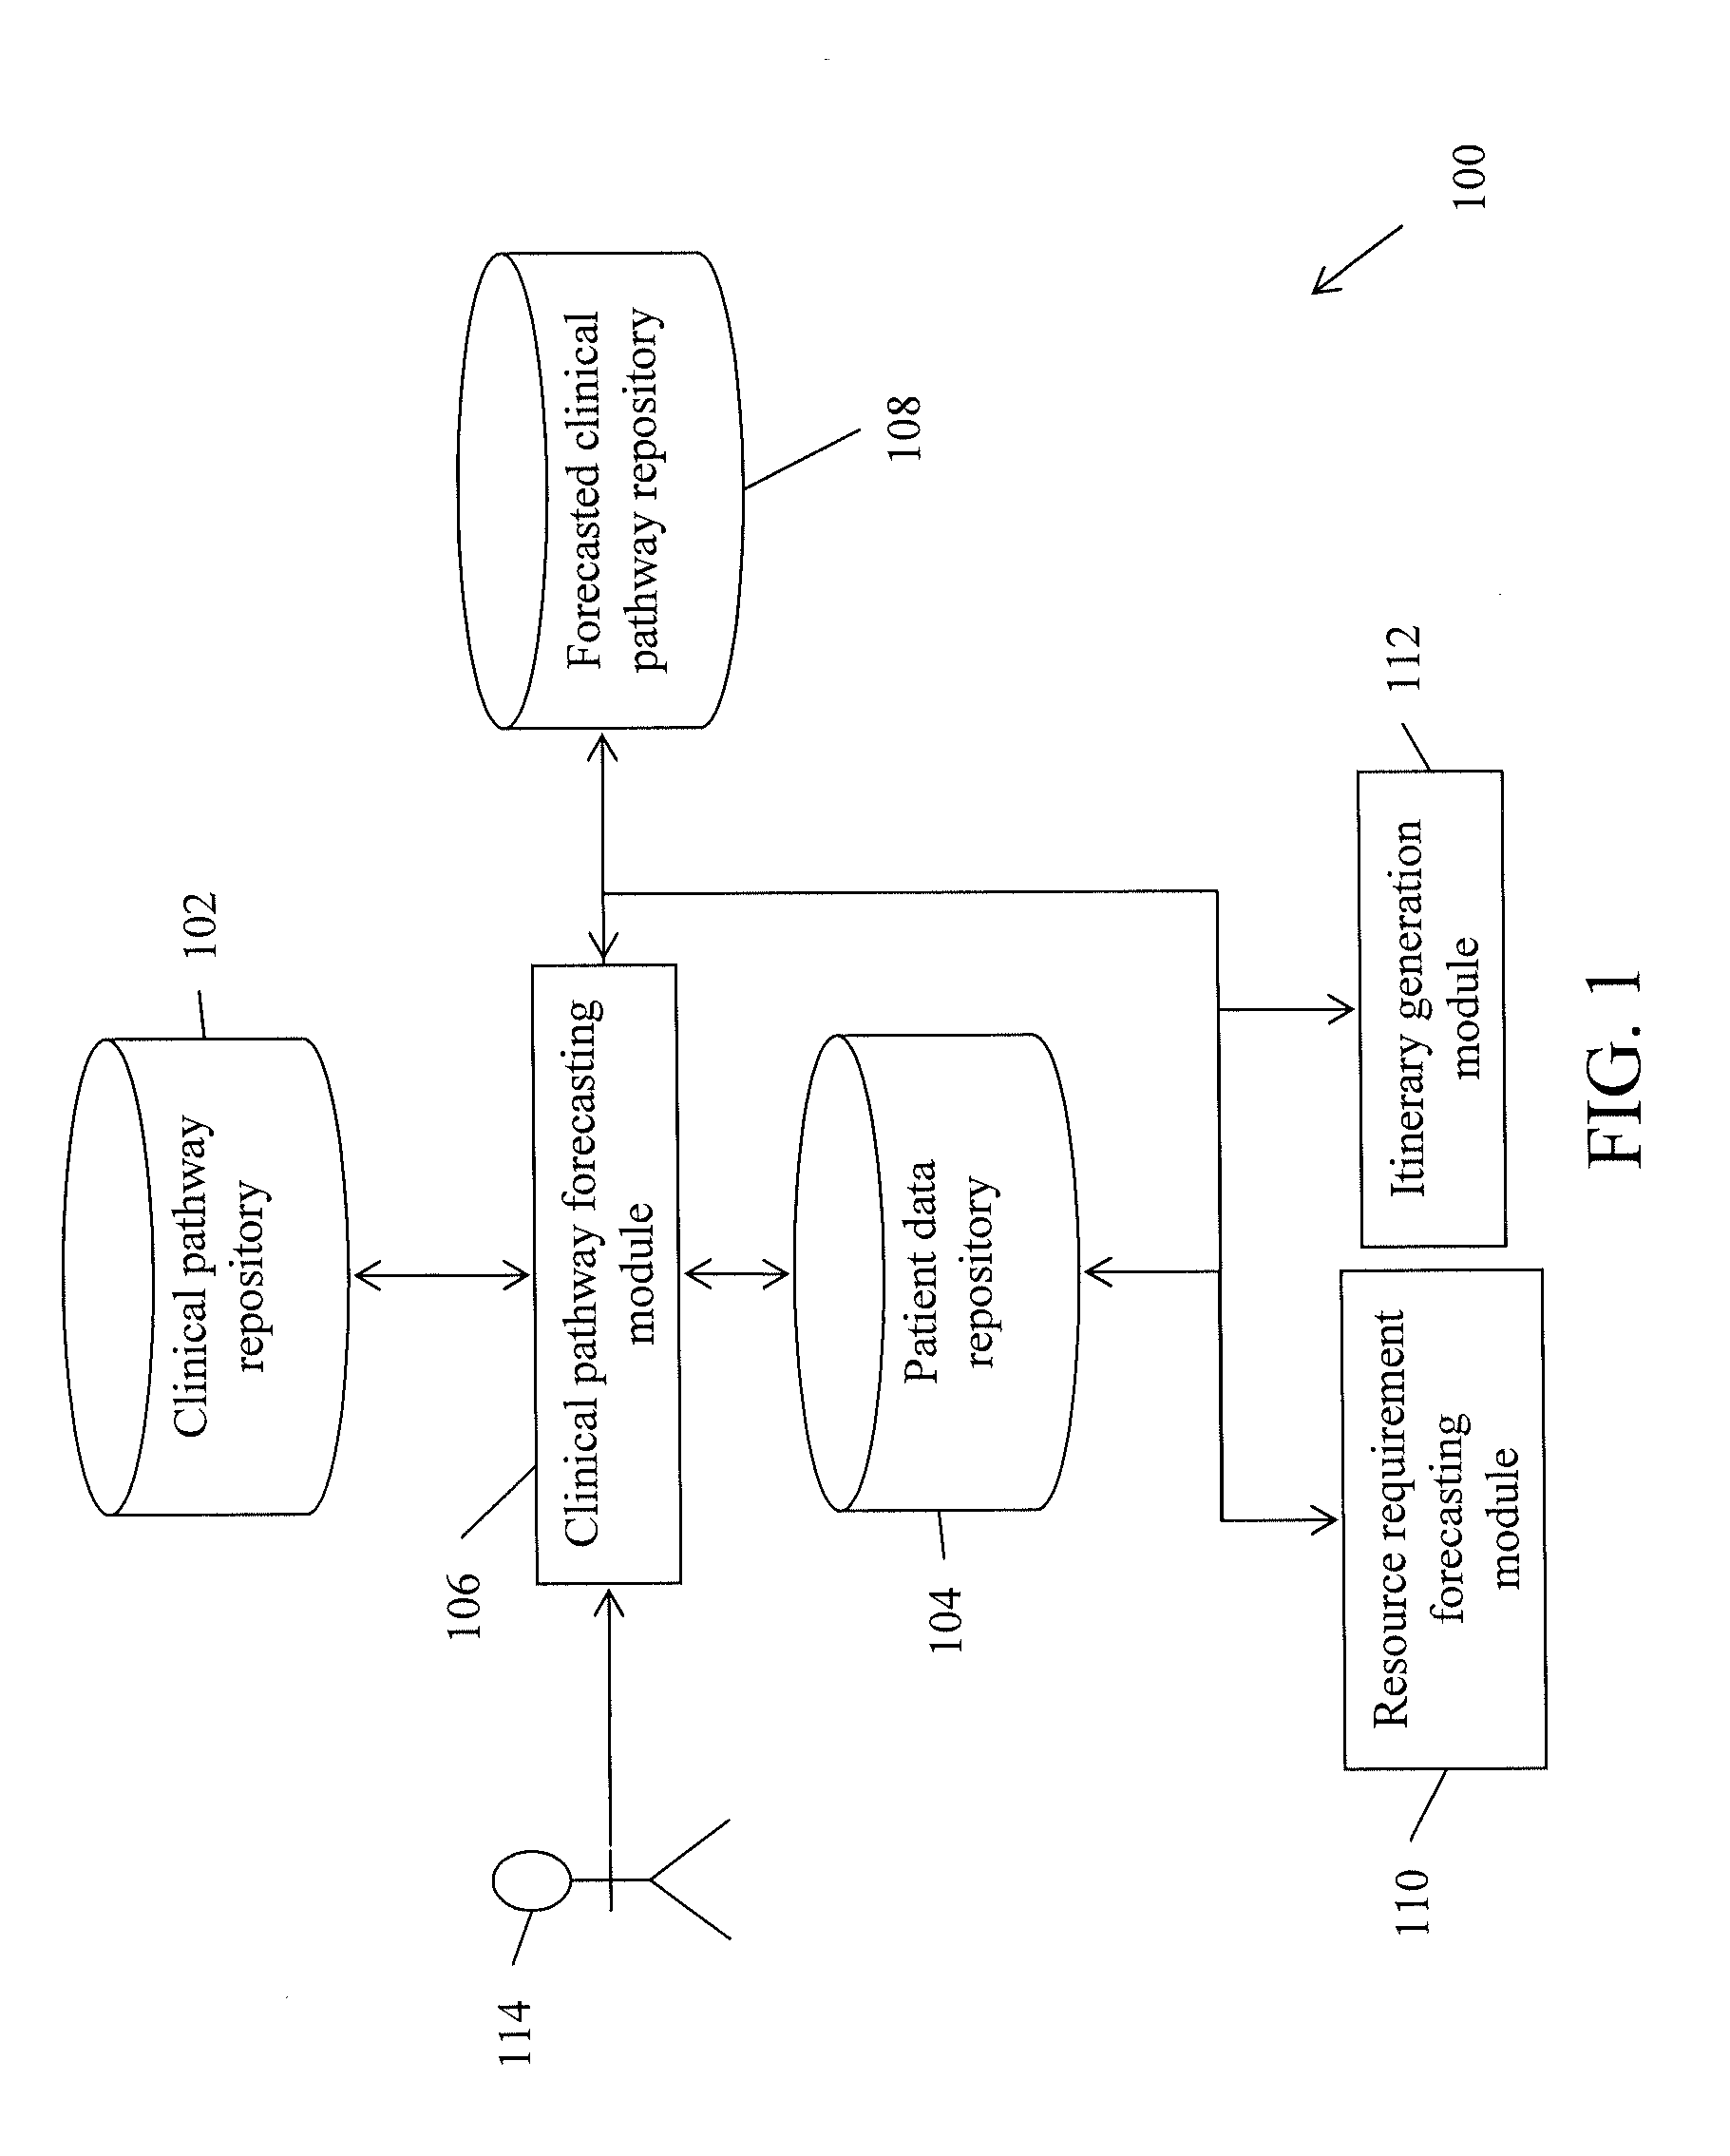 Method and system for forecasting clinical pathways and resource requirements